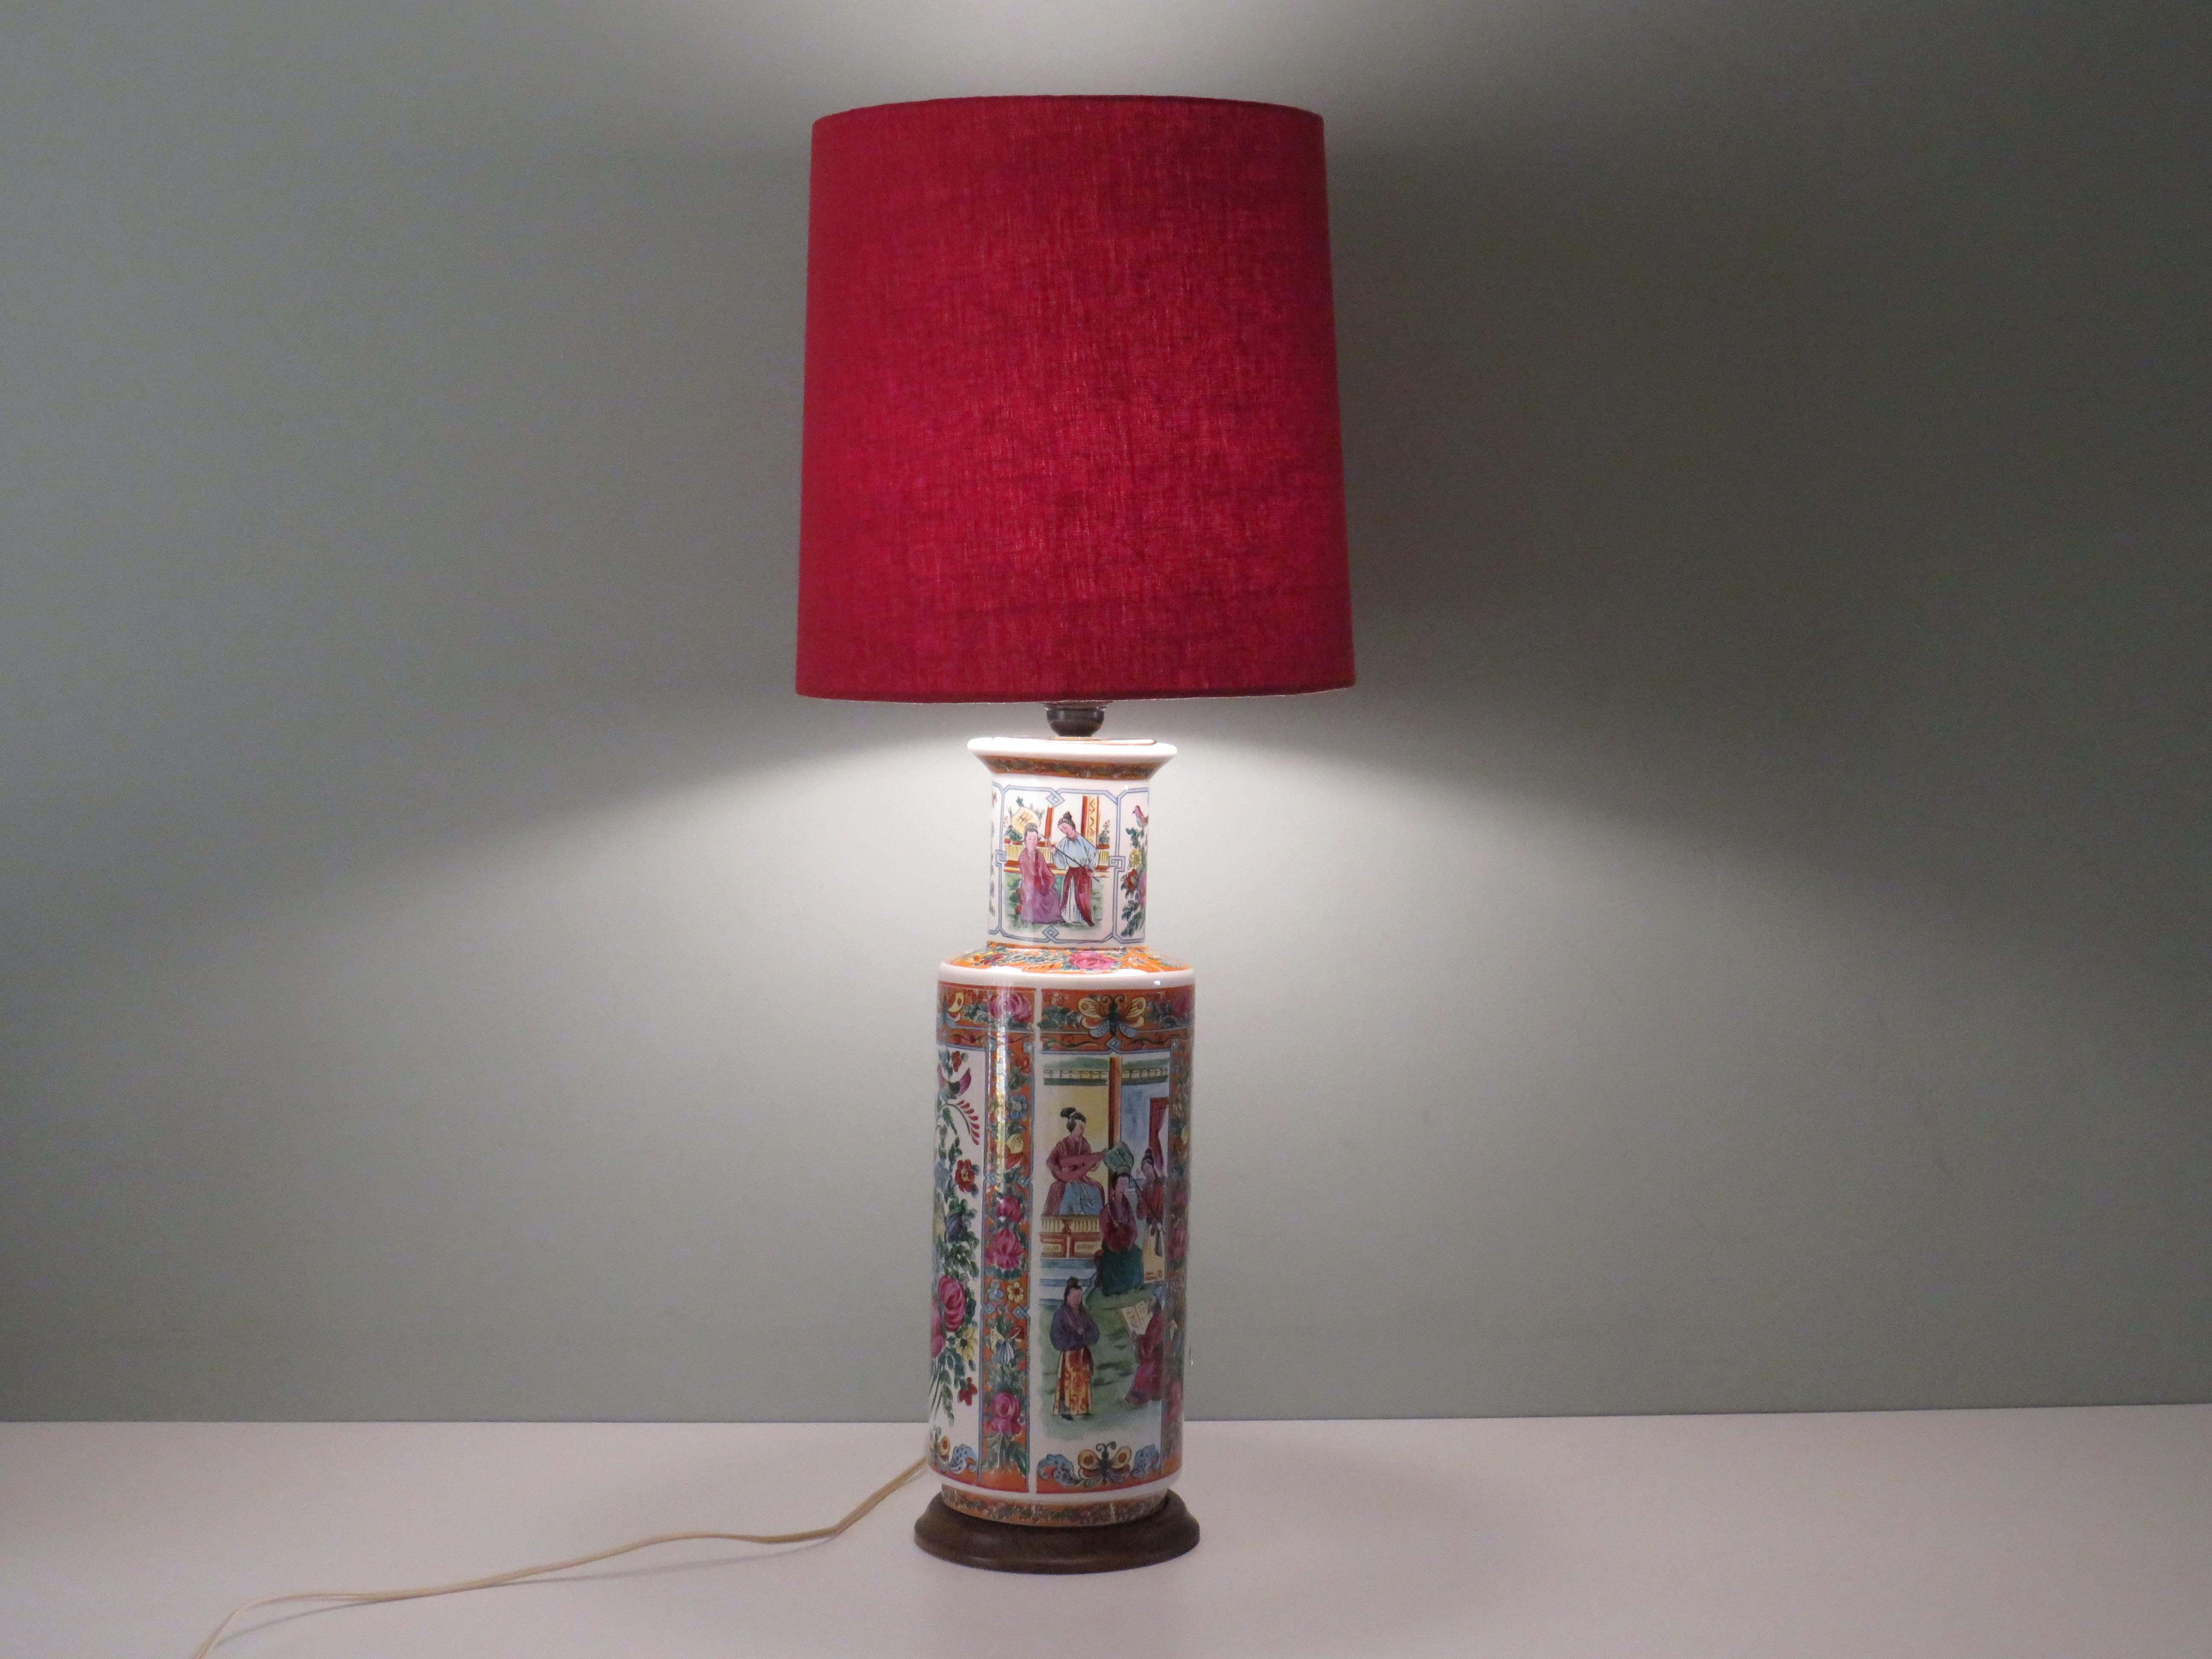 The ceramic lamp base has a Chinese-inspired motif and rests on a teak base.
The lampshade is made of dark red linen and is handmade to measure.
The dimensions of the lamp base: H 55 cm and diameter 16 cm.
The dimensions of the lampshade: H 34